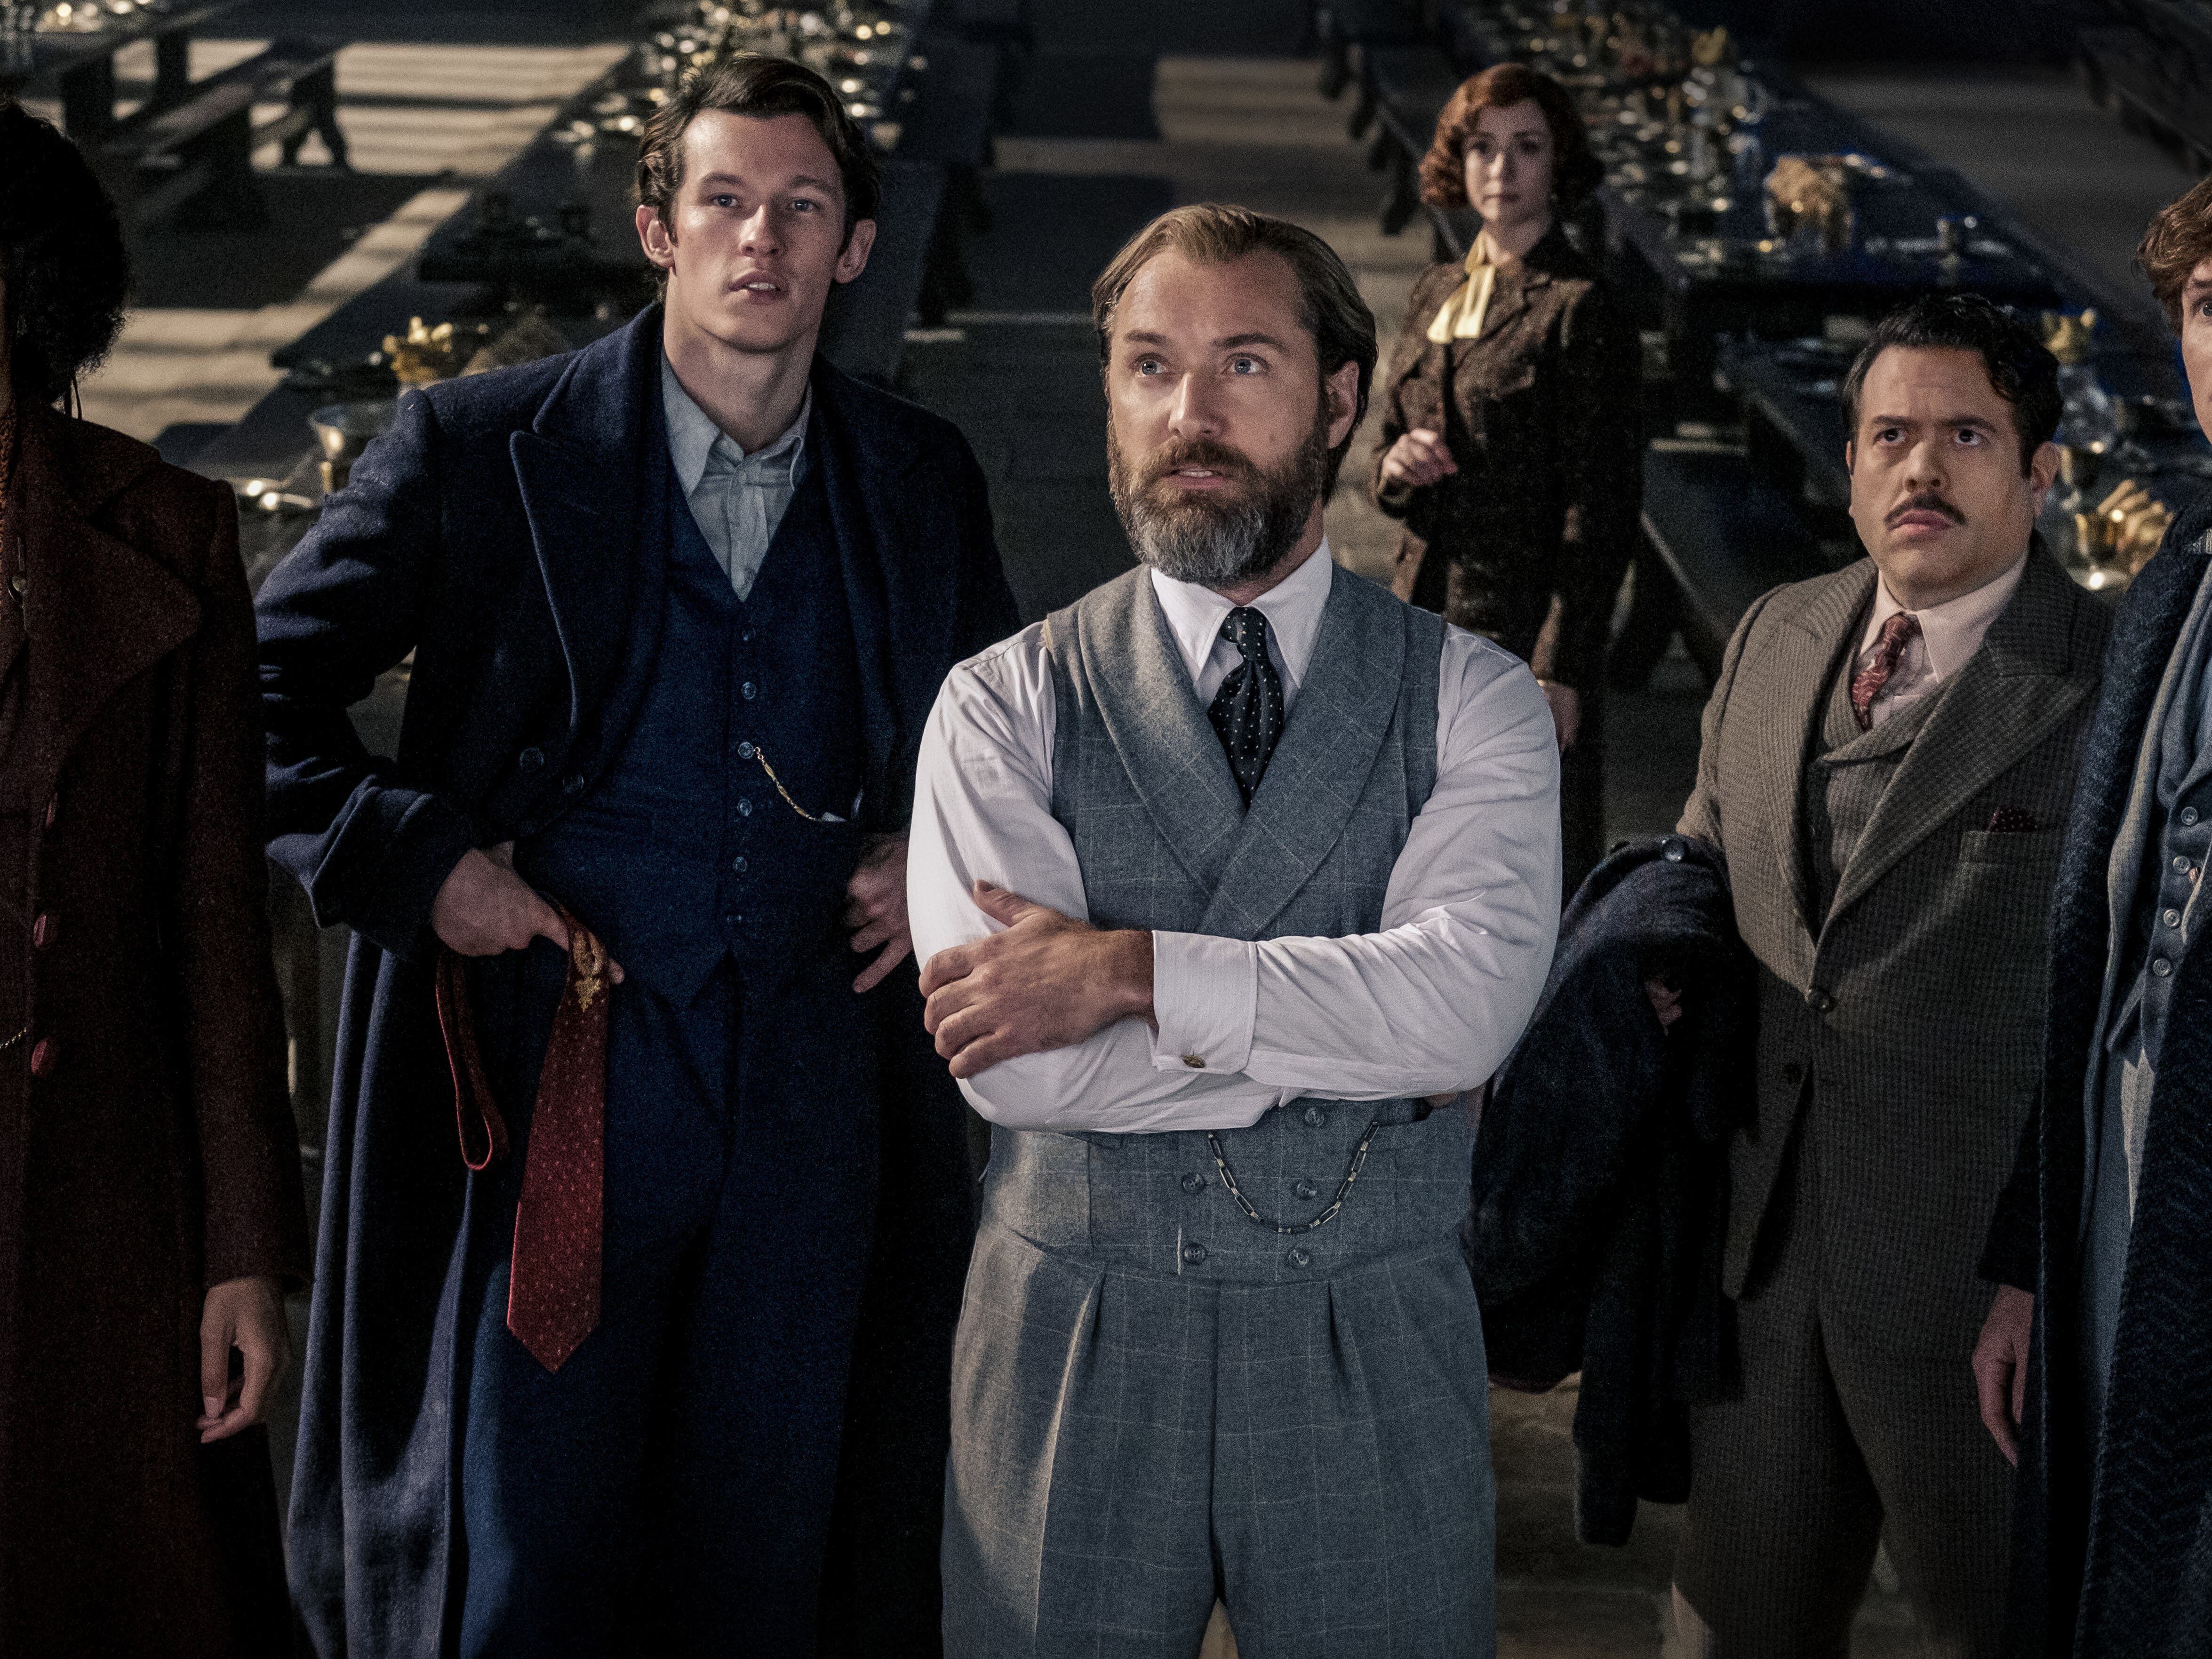 Mixed reviews for third instalment of Fantastic Beasts franchise